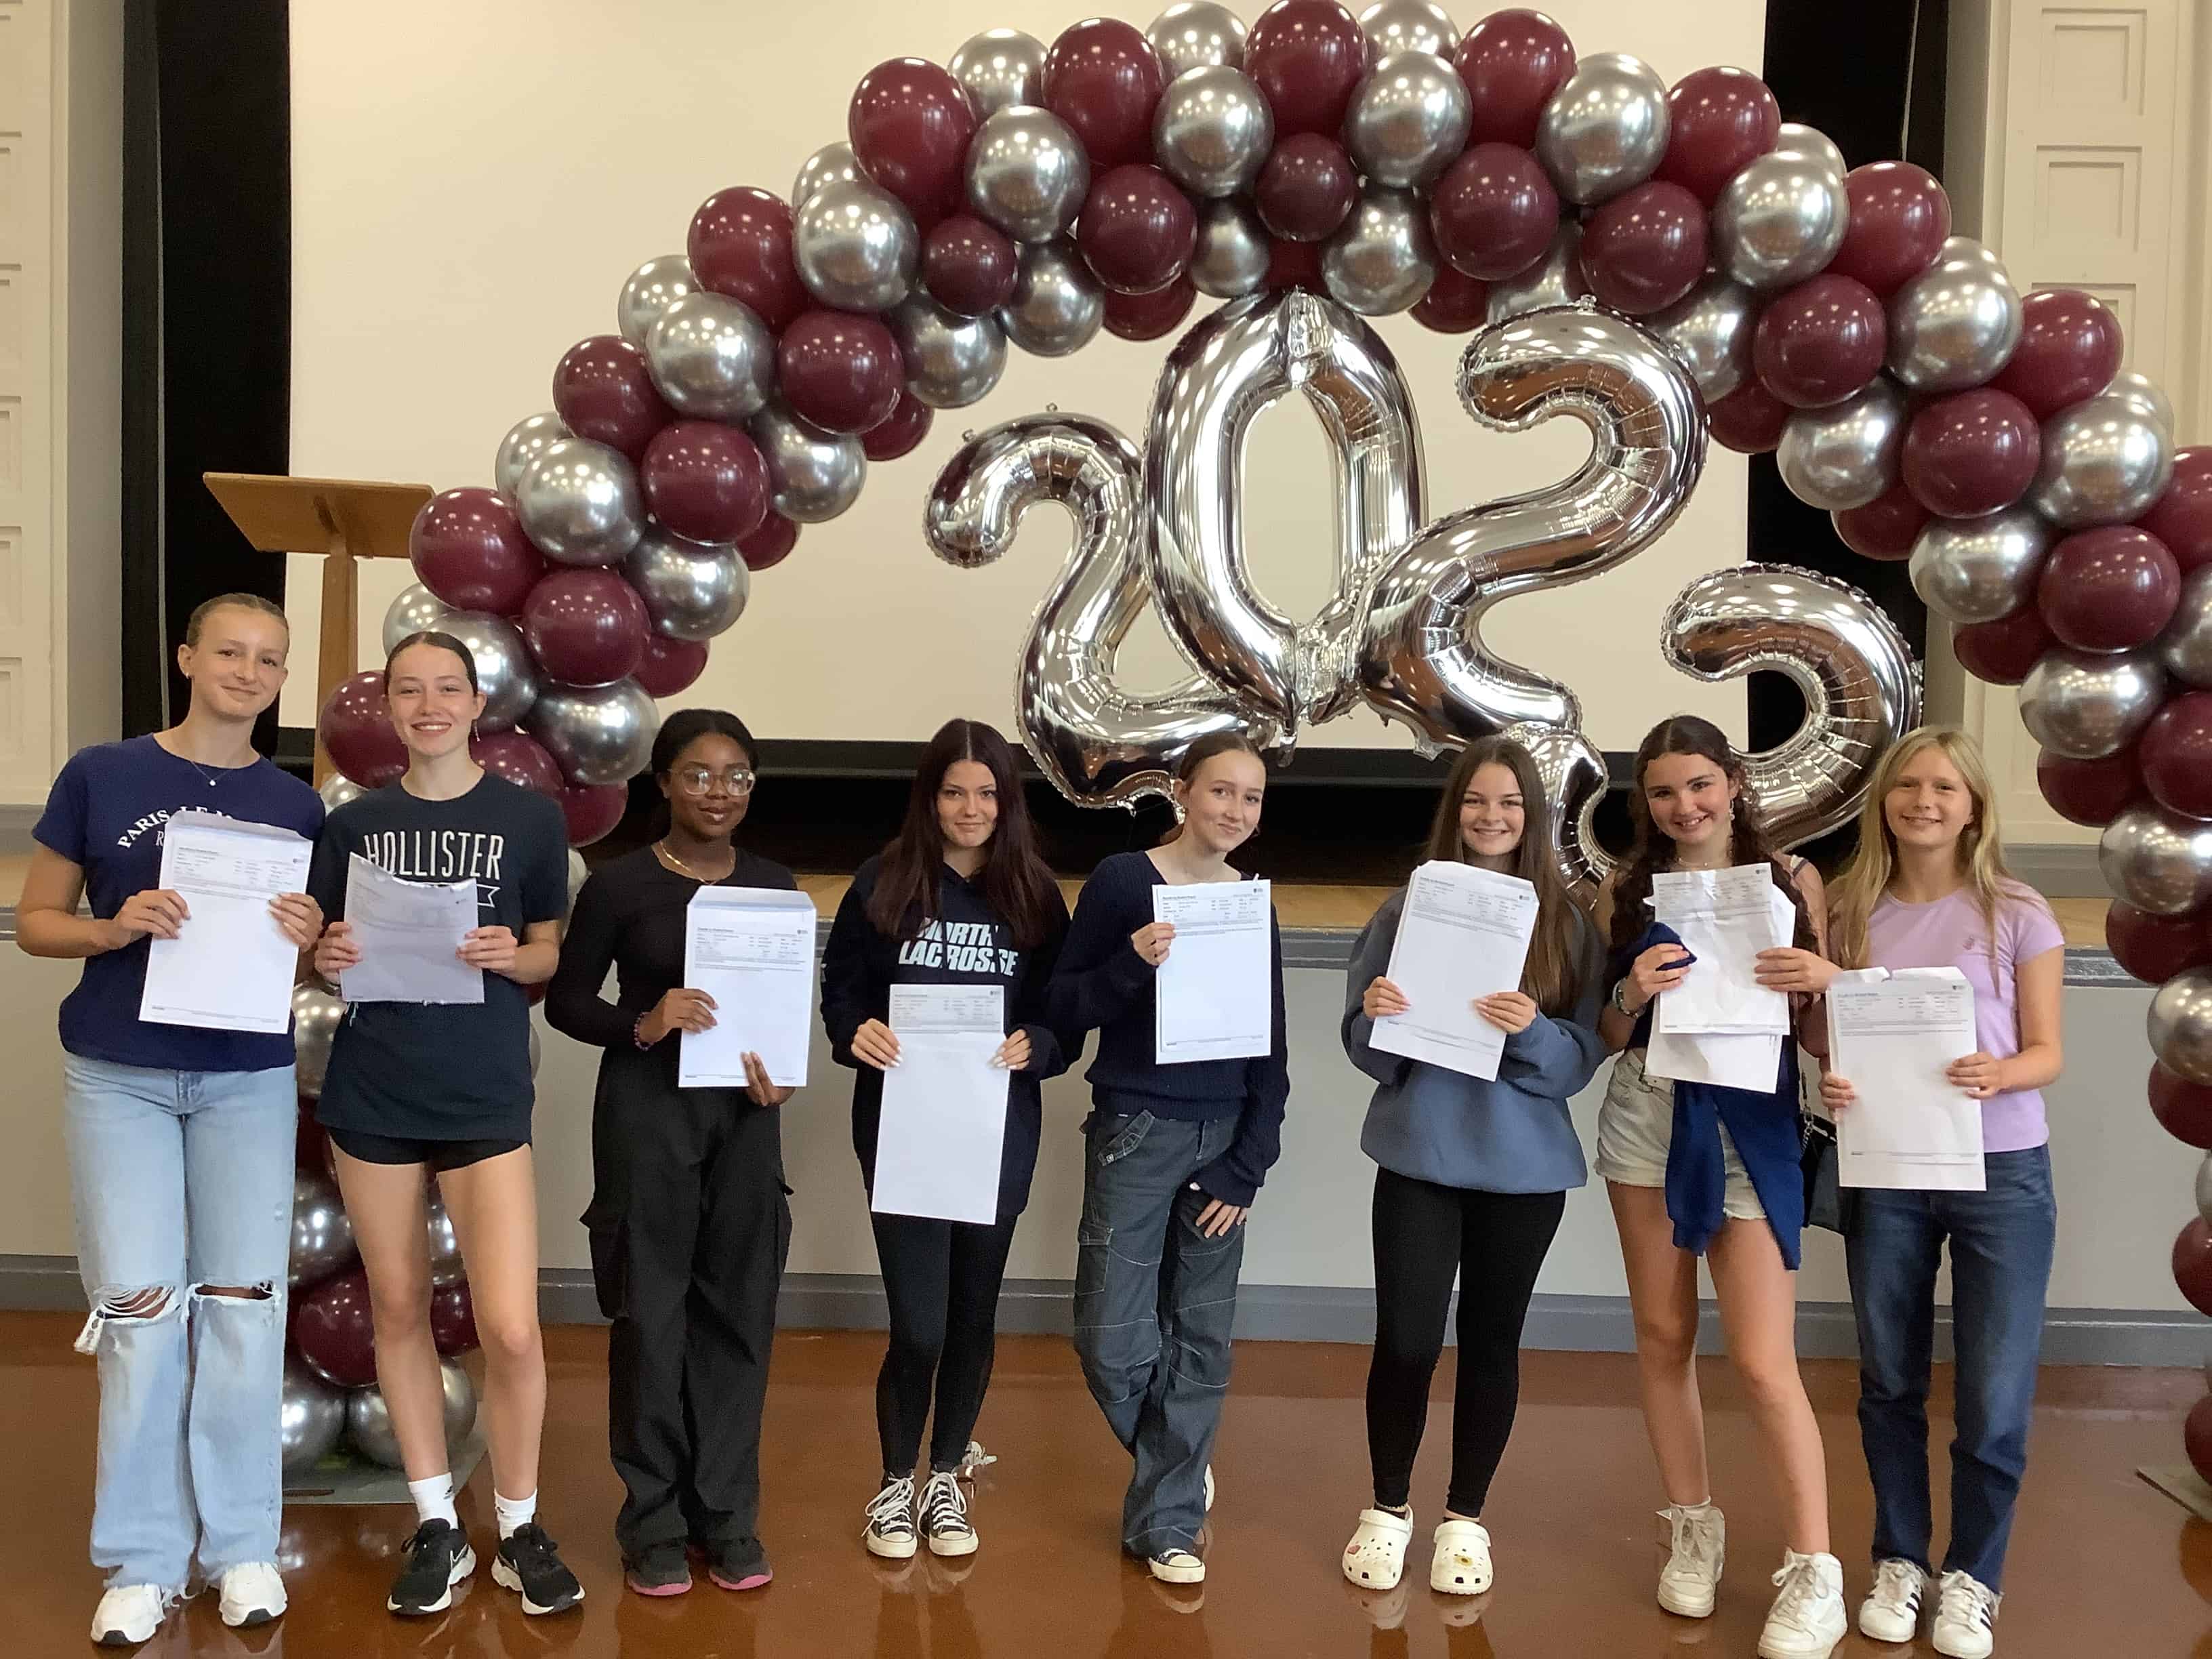 Eight Year 9 students from Hazel Grove High School smile holding their MFL results under a balloon arch at GCSE results day 2023.